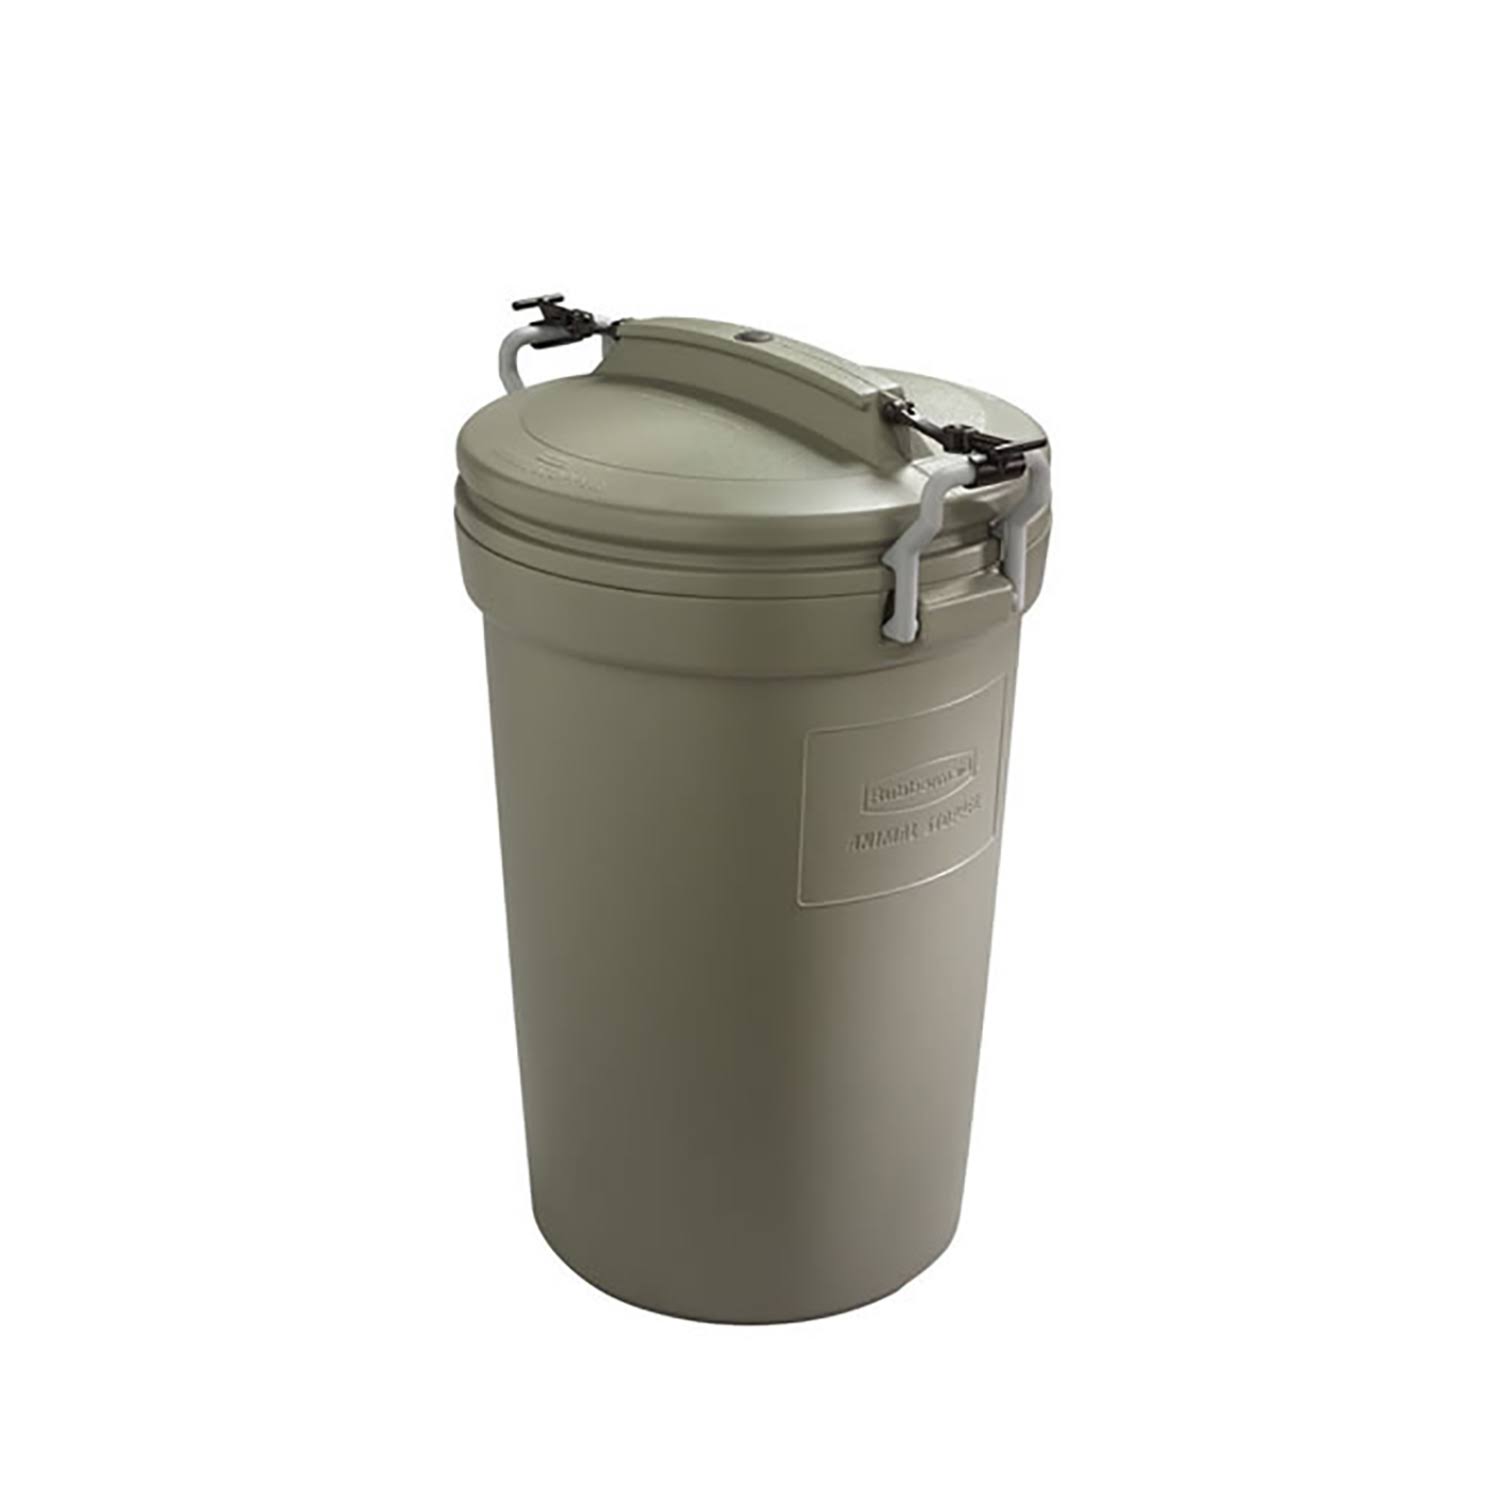 Rubbermaid Garbage Can - 22"x24"